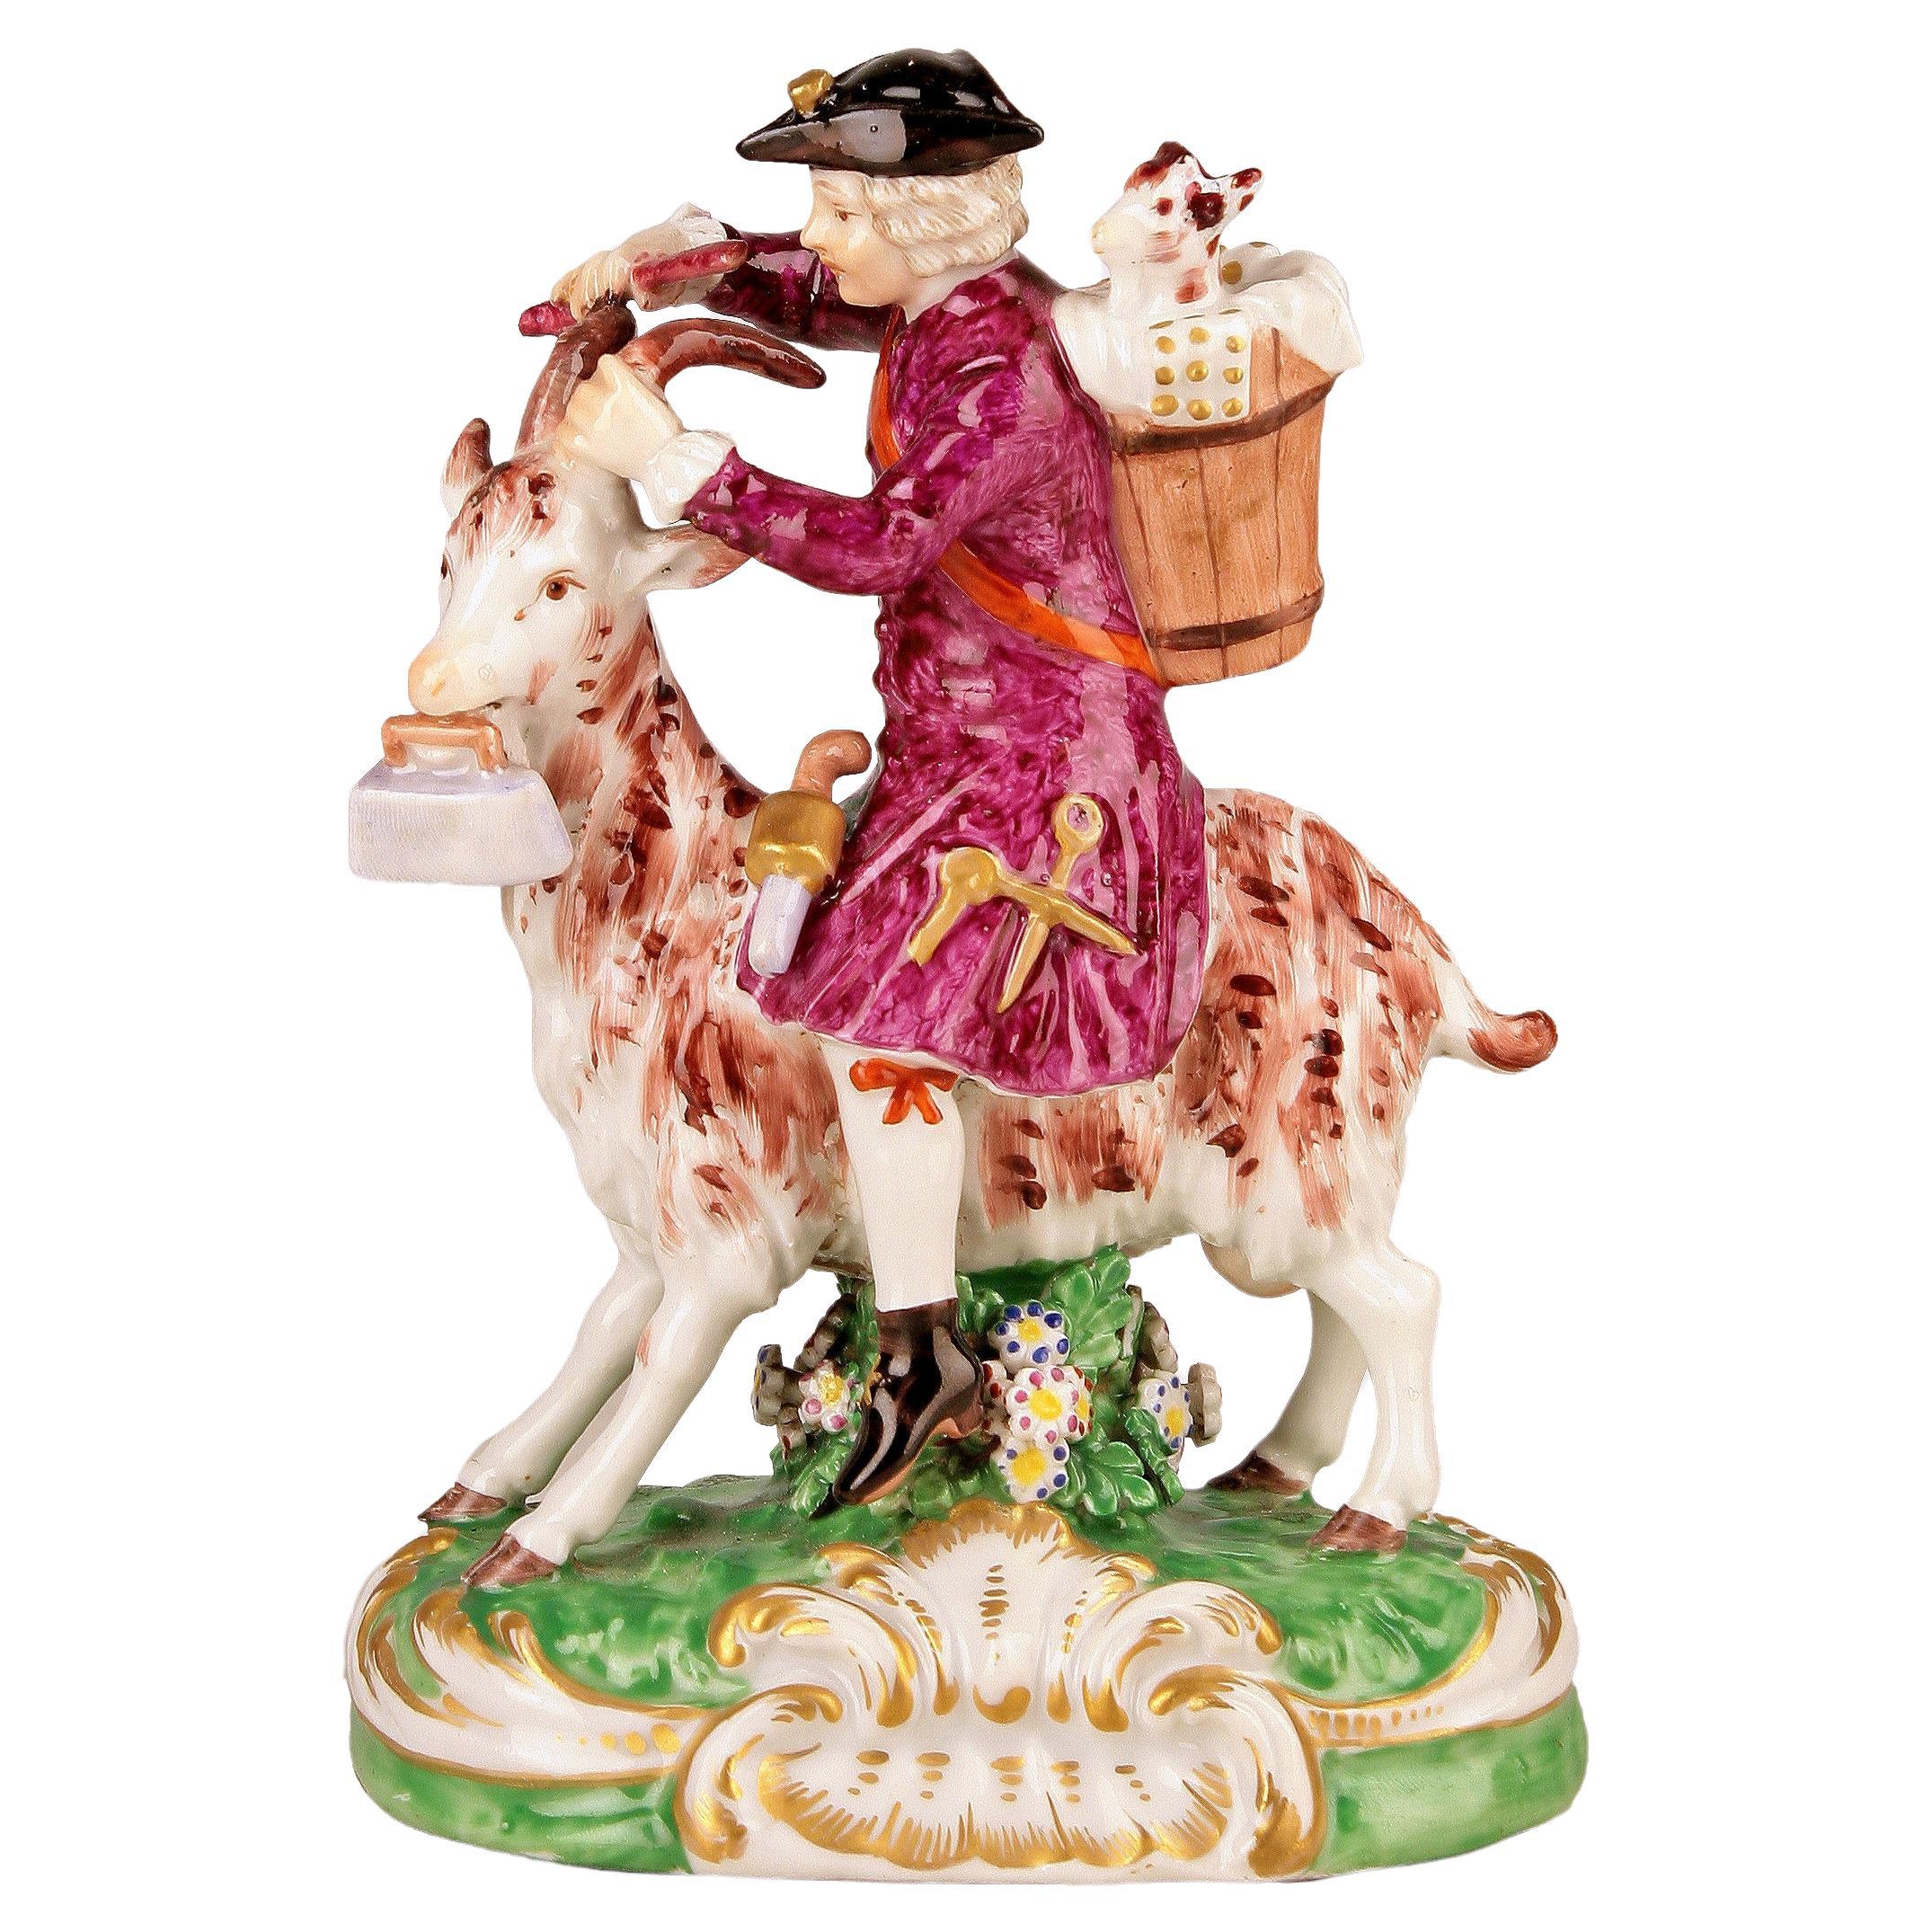 18th C. Baroque/Rococo English Goat-Riding Tailor Porcelain by Chelsea Pottery